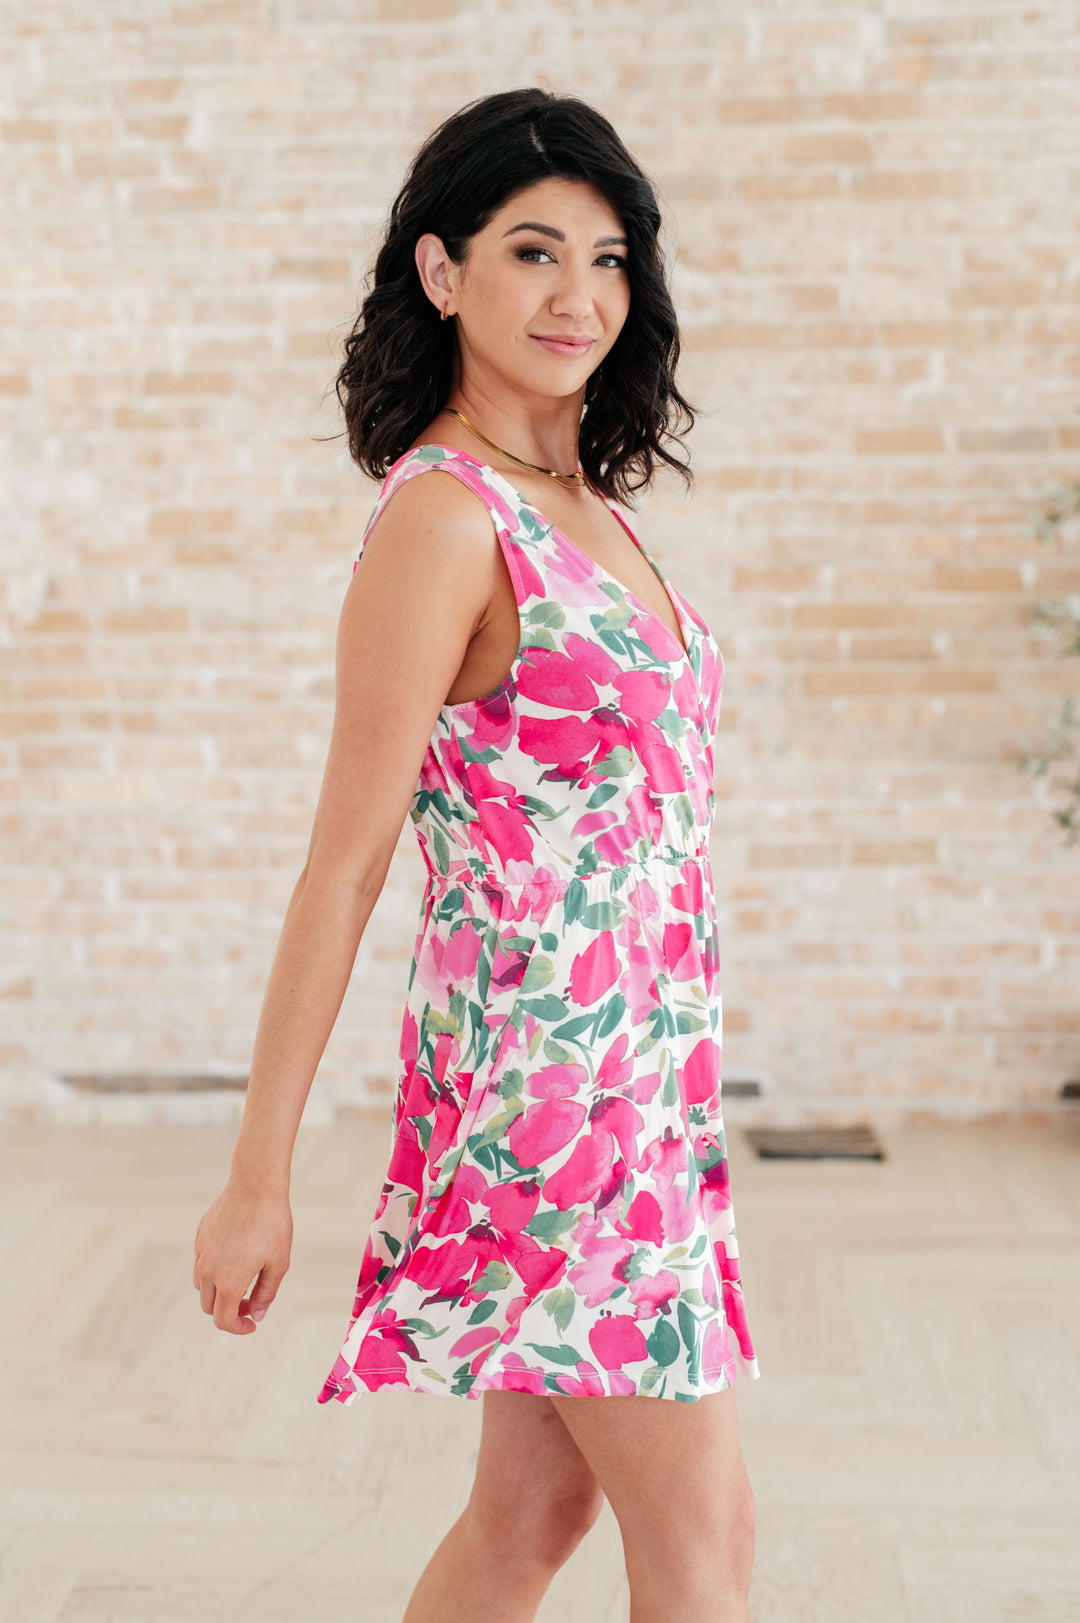 The Suns Been Quite Kind V-Neck Dress in Pink-Dresses-Inspired by Justeen-Women's Clothing Boutique in Chicago, Illinois